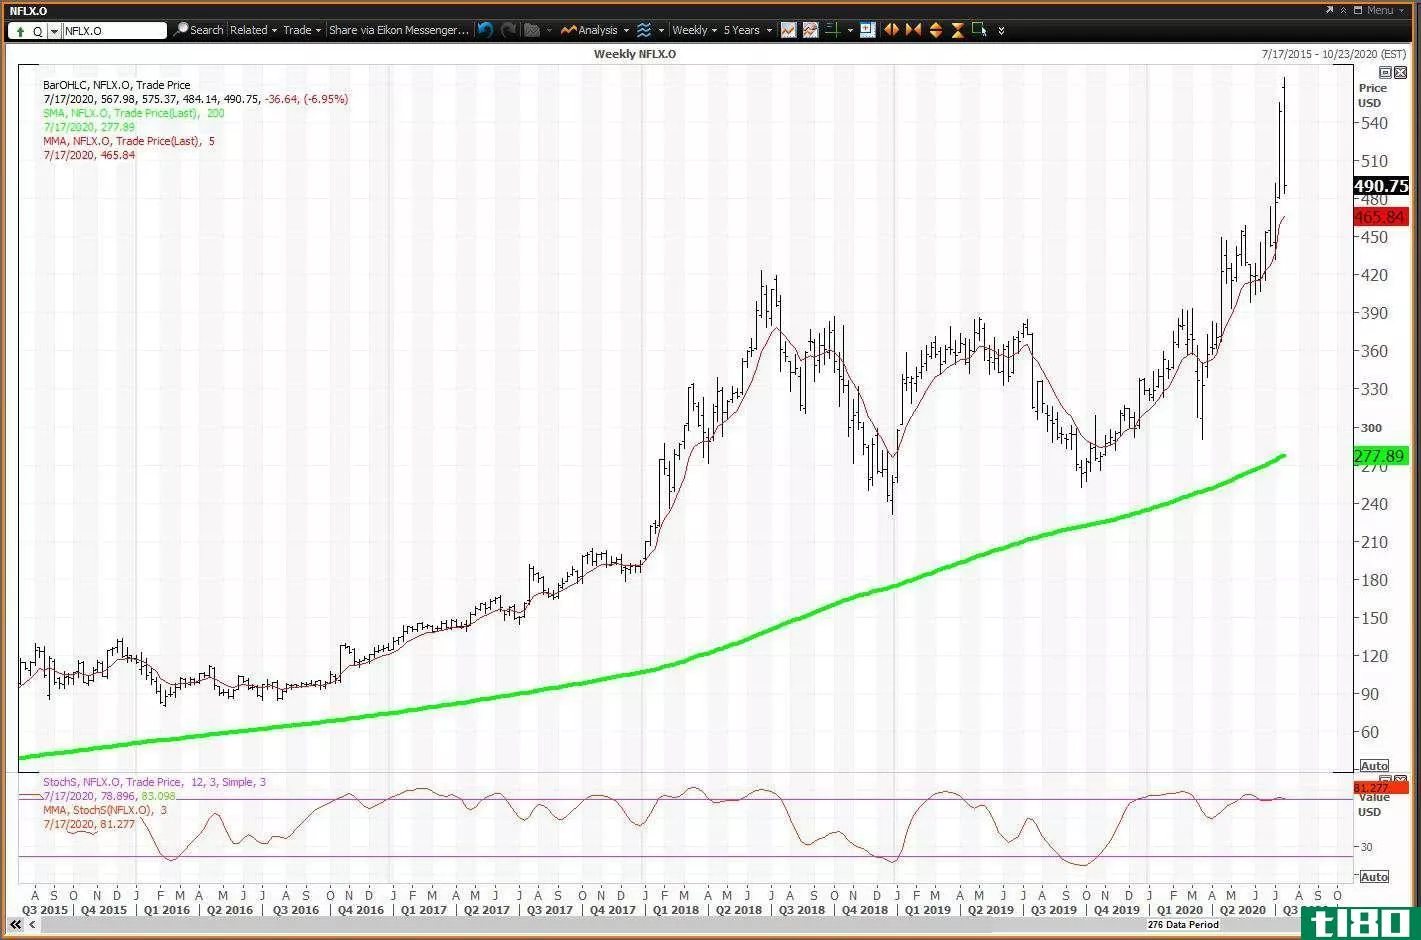 Weekly chart showing the share price performance of Netflix, Inc. (NFLX)